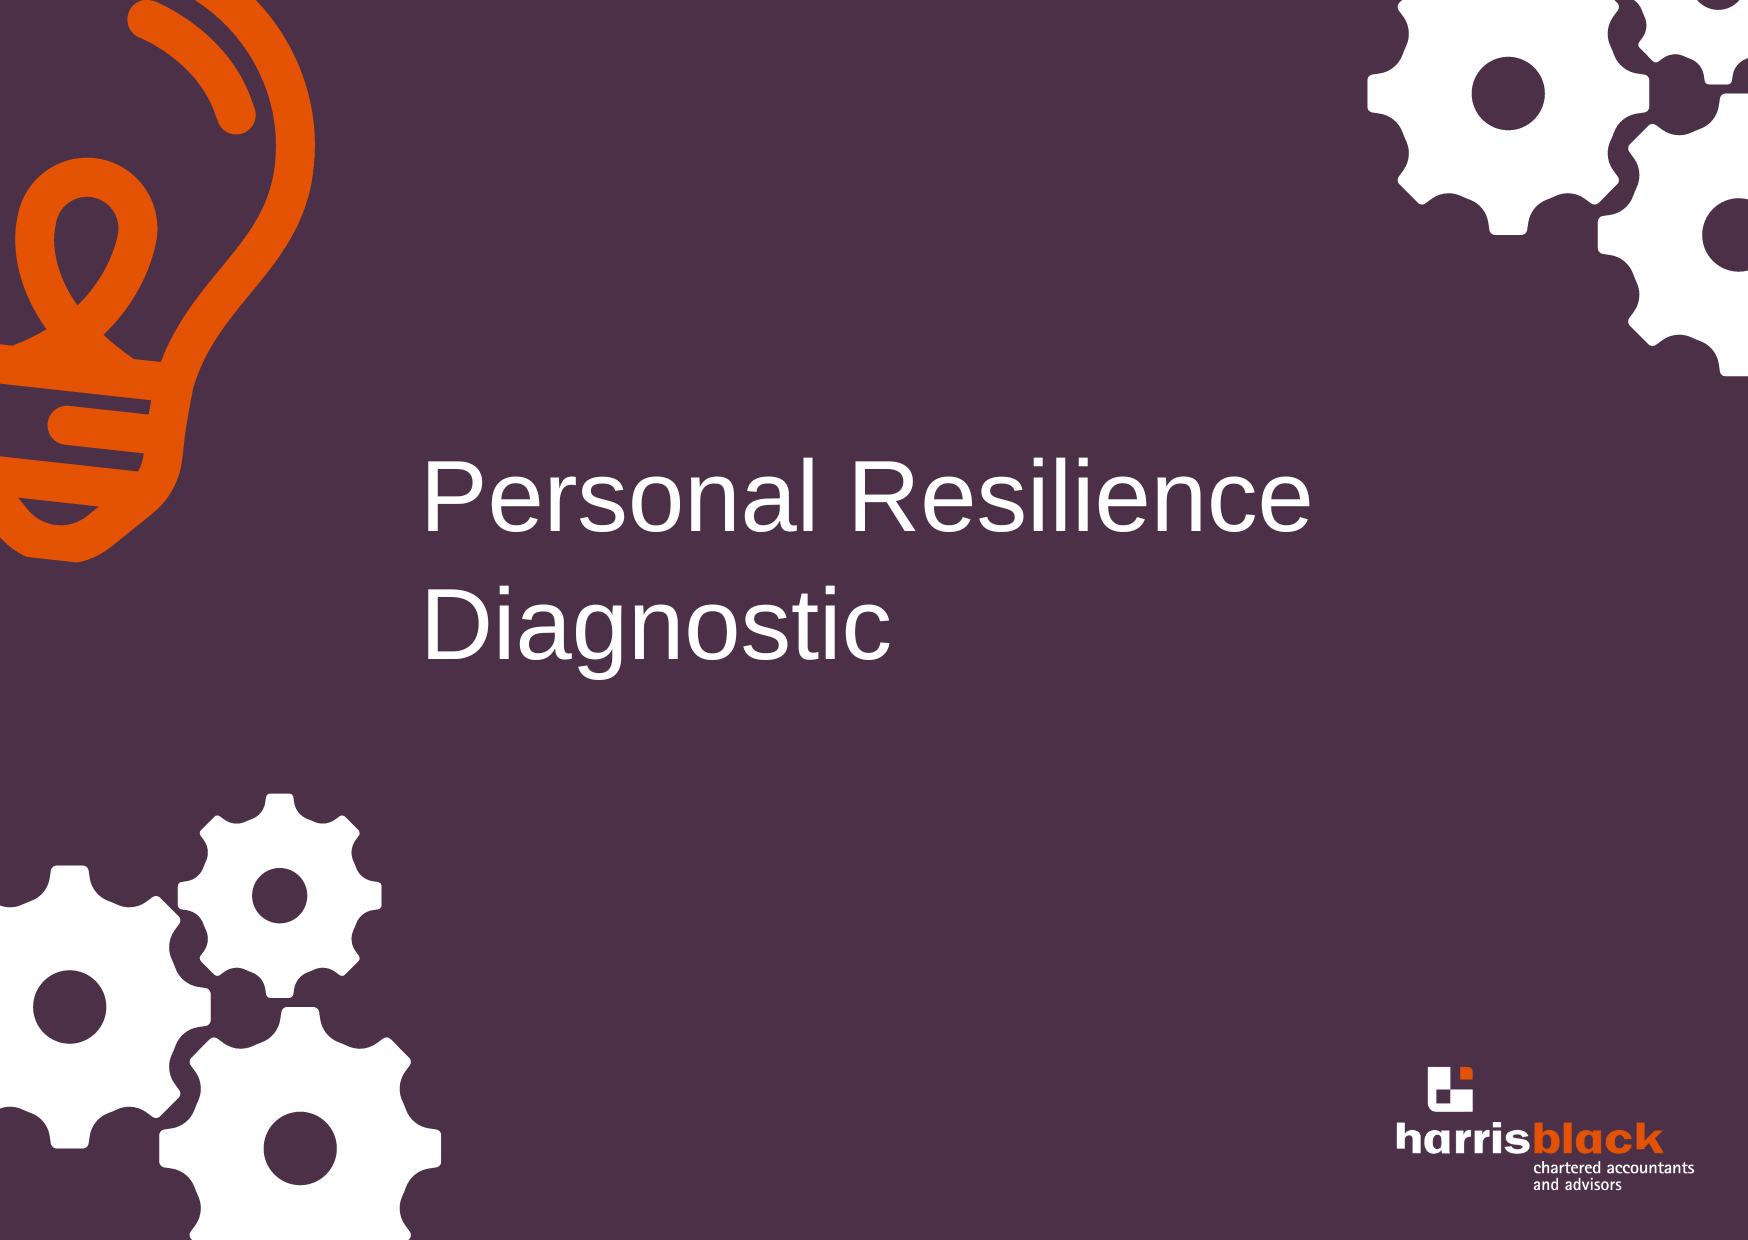 Personal Resilience Diagnostic